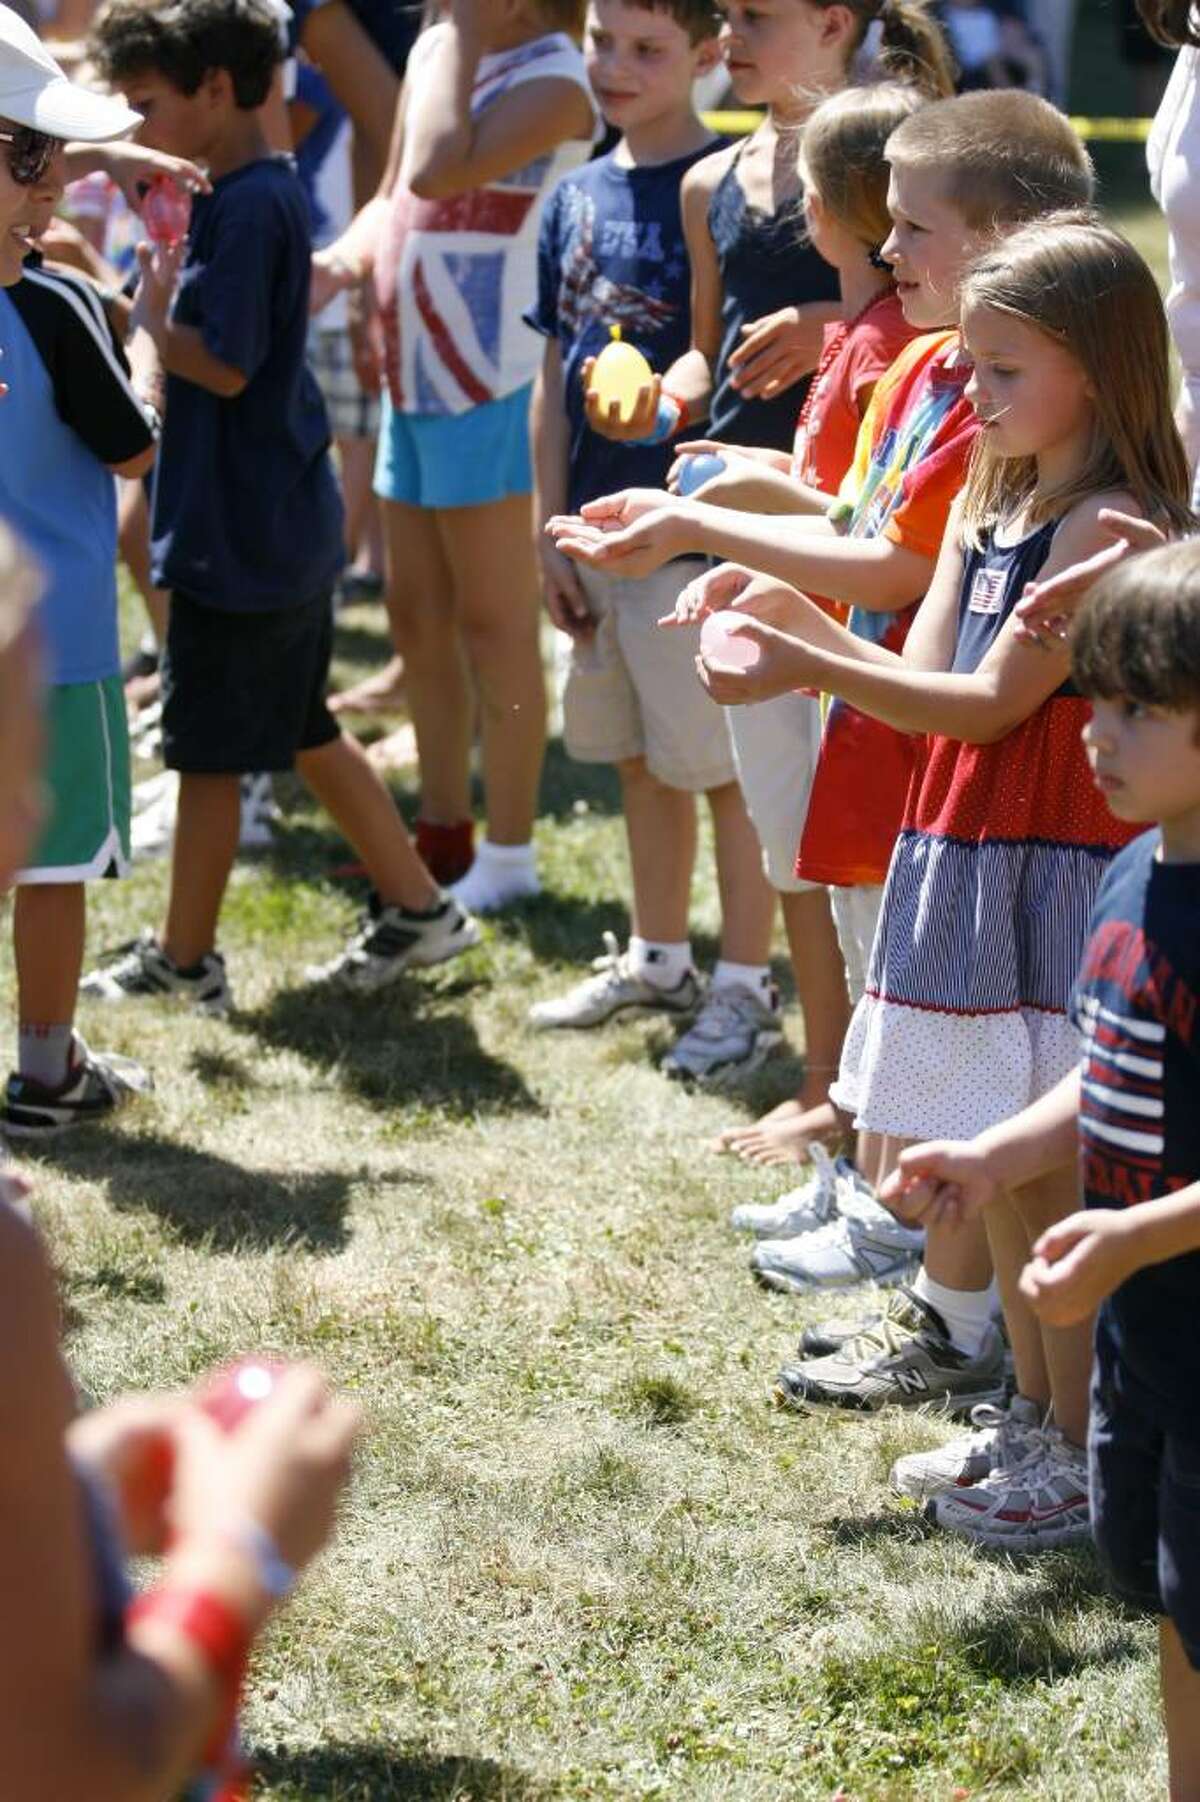 Children line up to compete in a water-balloon toss during the Pequot Library's Independence Day festivities in Southport on Sunday, July 4, 2010.